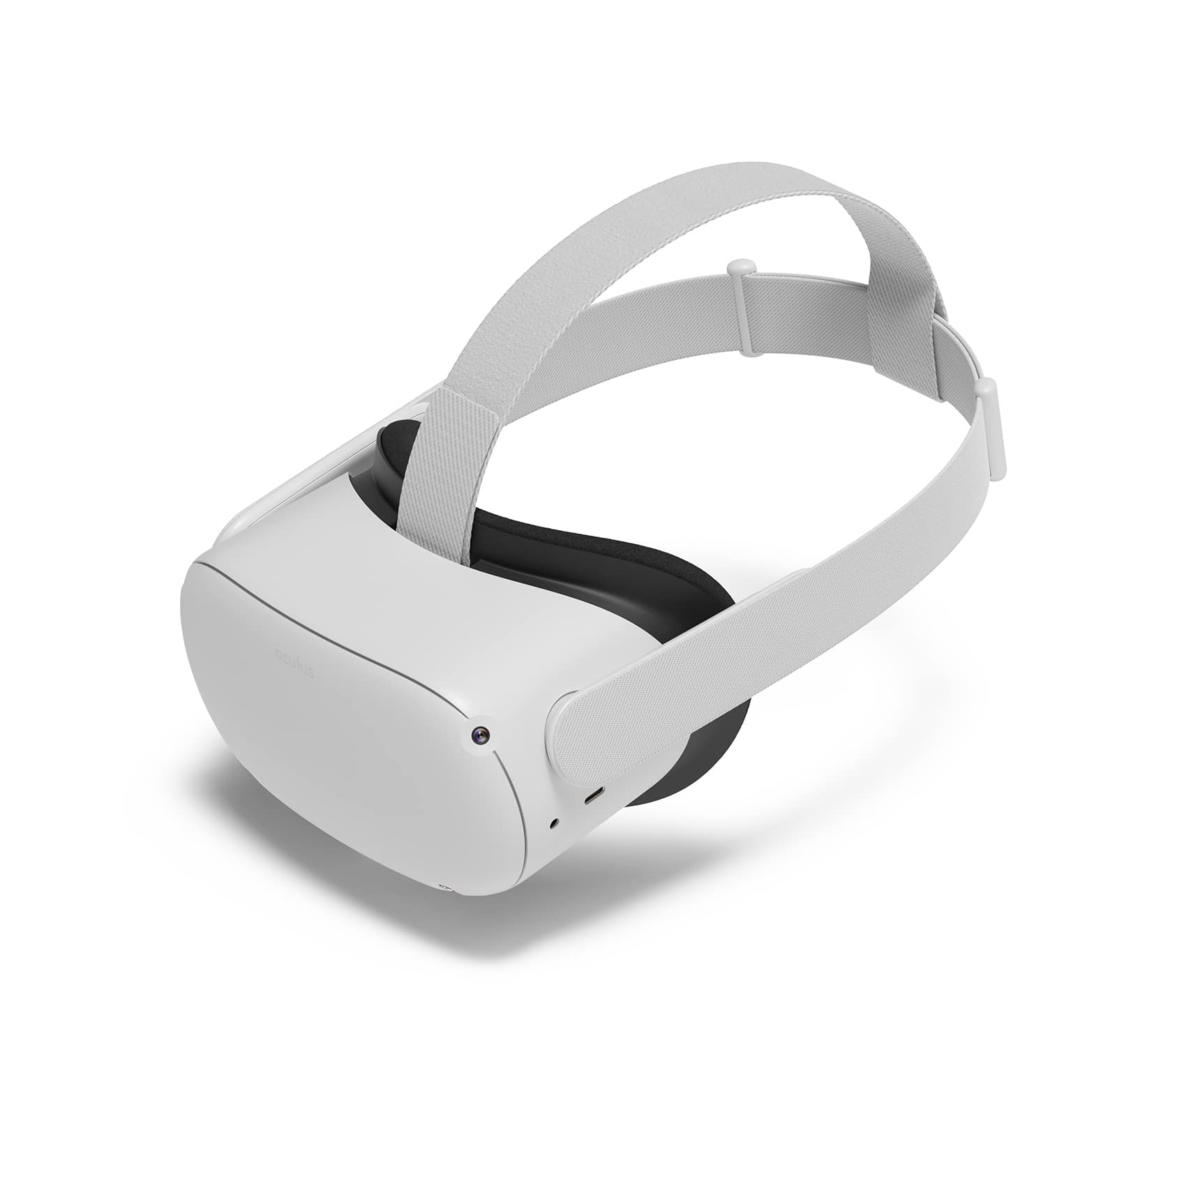 301-00351-02 - $549 - Oculus Quest 2 Advanced All-In-One 256GB